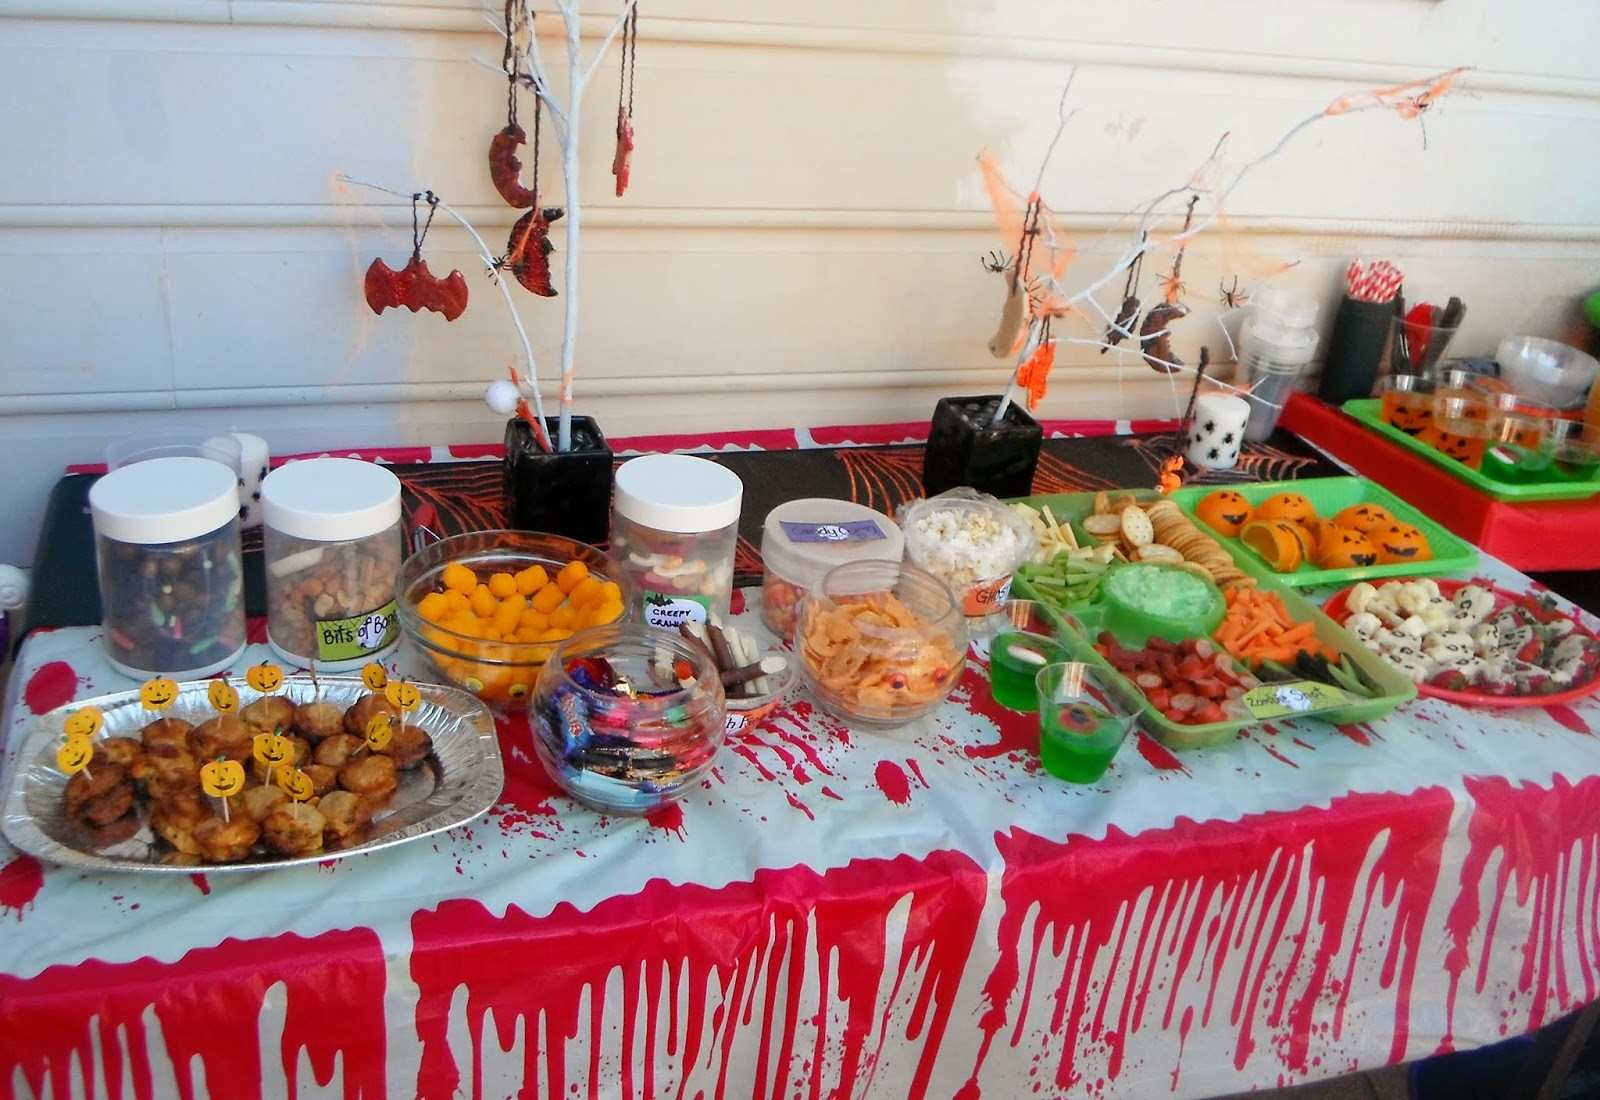 Halloween Party Idea For Kids
 Adventures at home with Mum Halloween Party Food